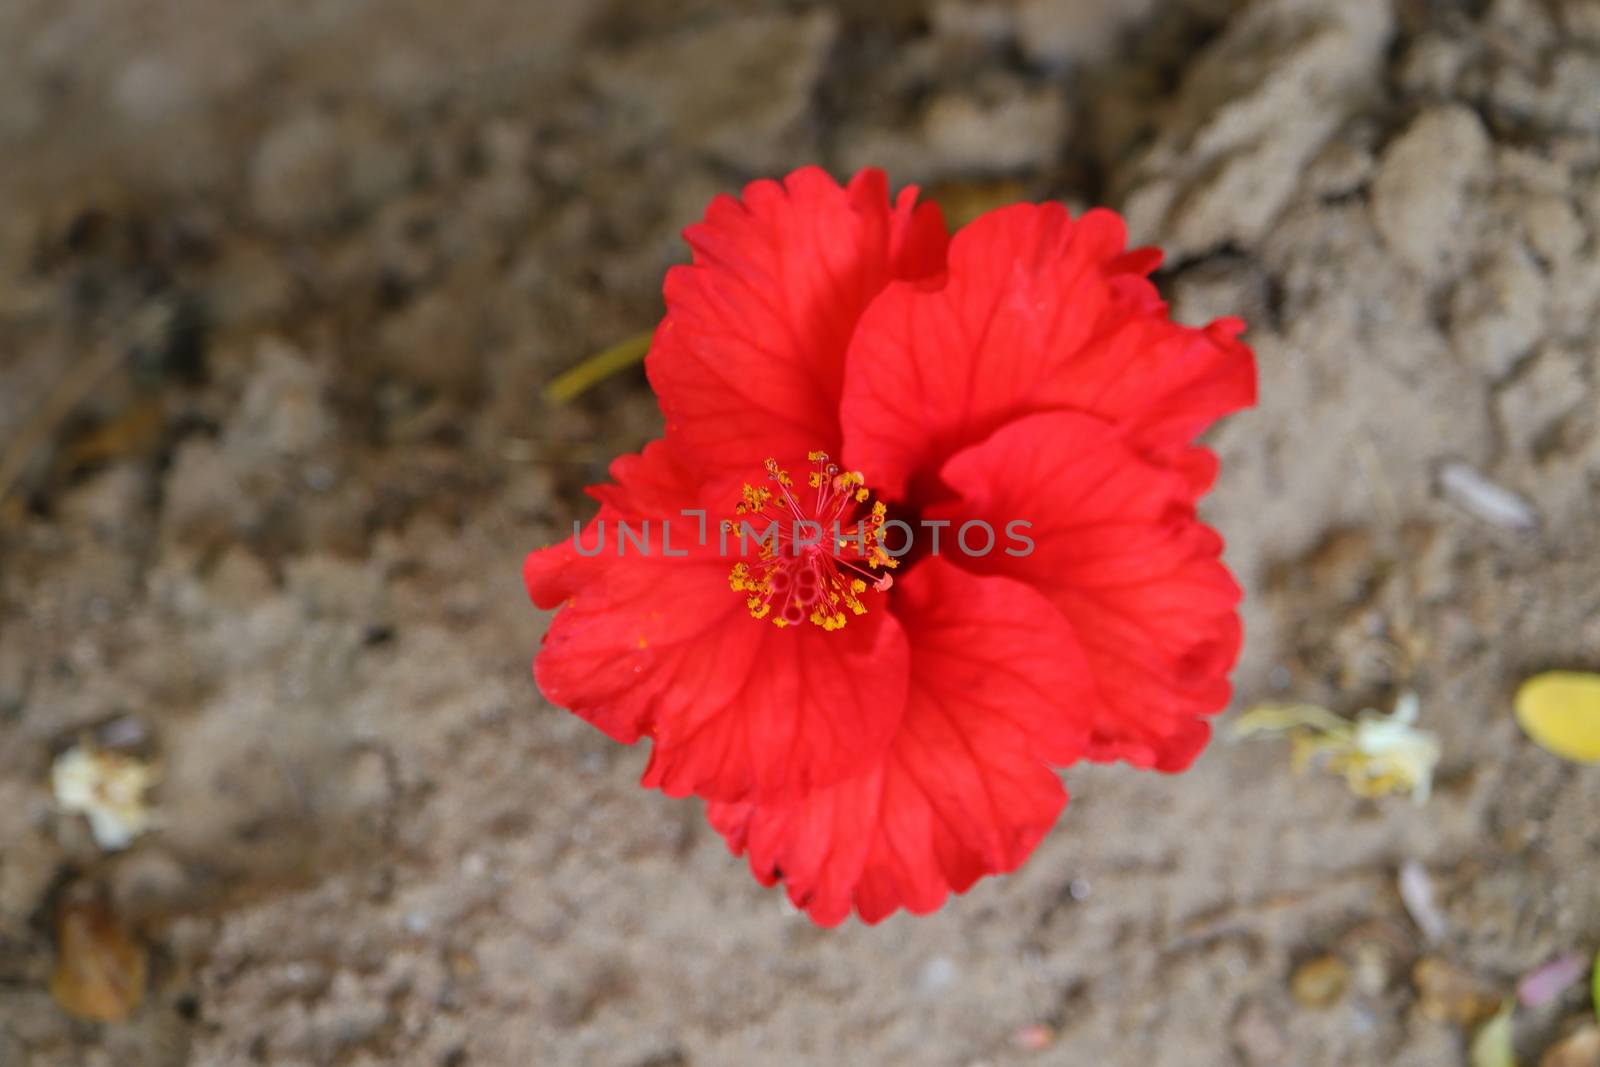 red hibiscus flower laying on ground, hd image by 9500102400